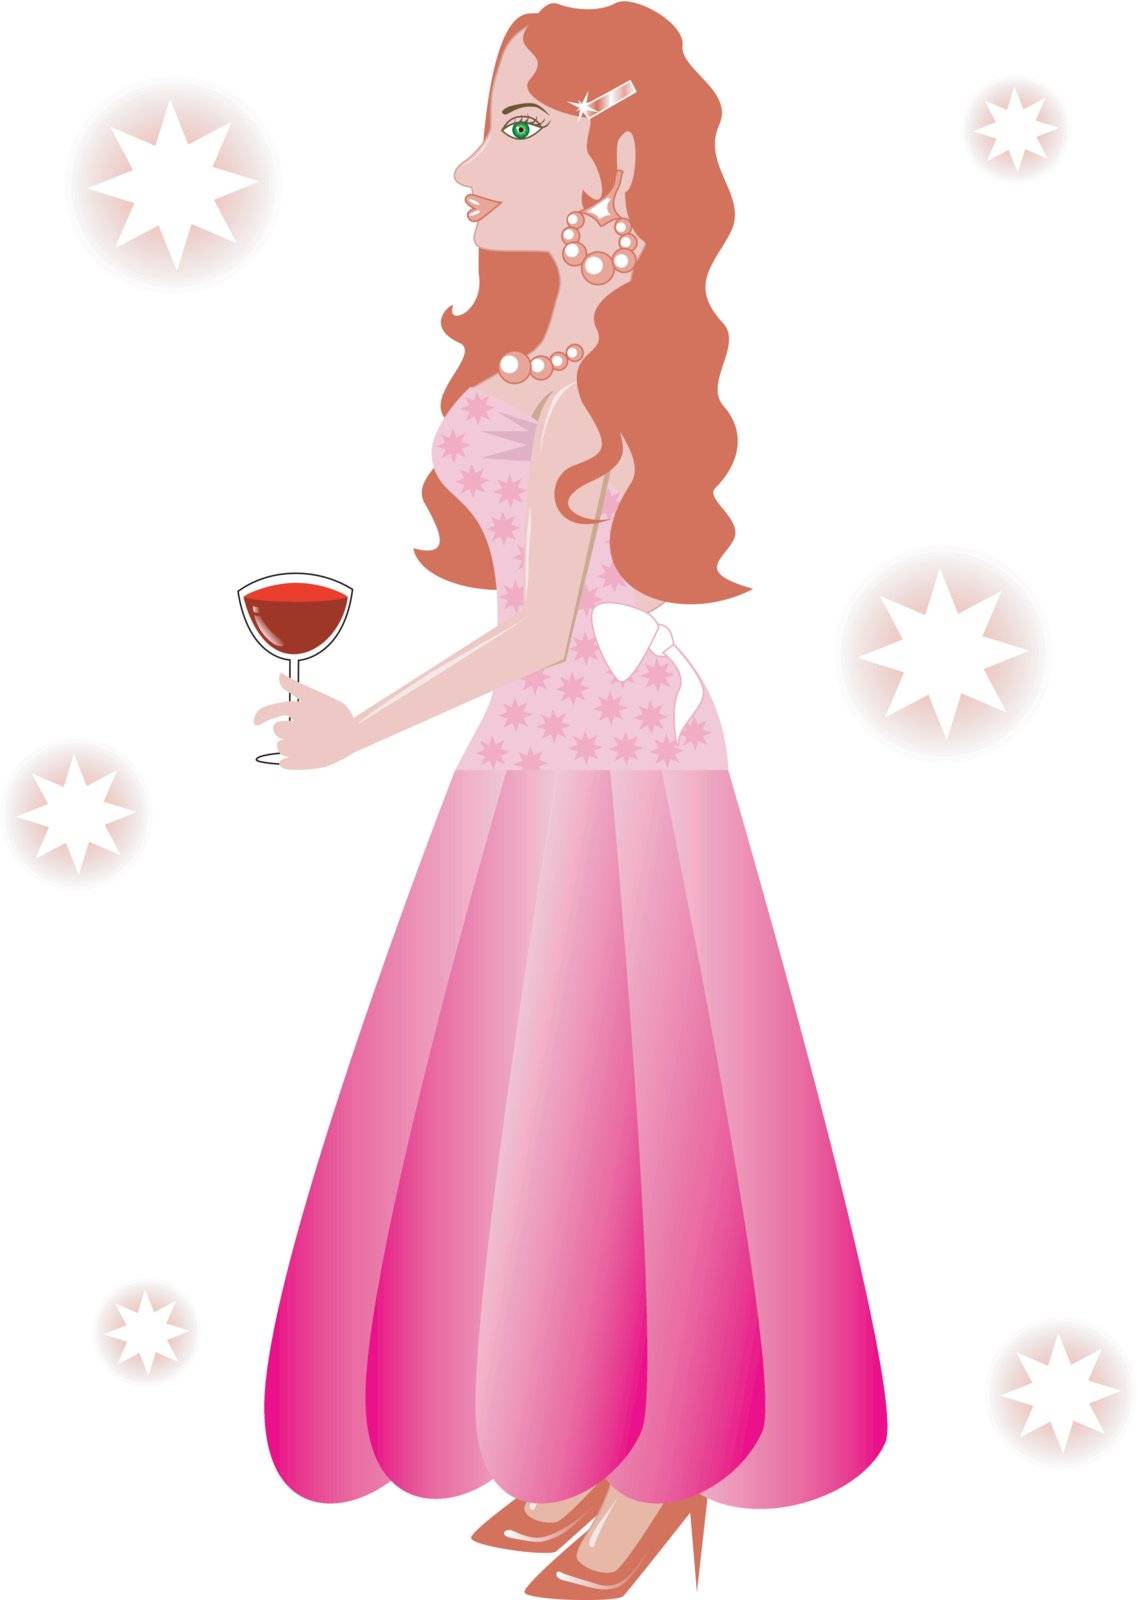 Vector Illustration of Formal Gown 2. A woman holding a glass of wine.